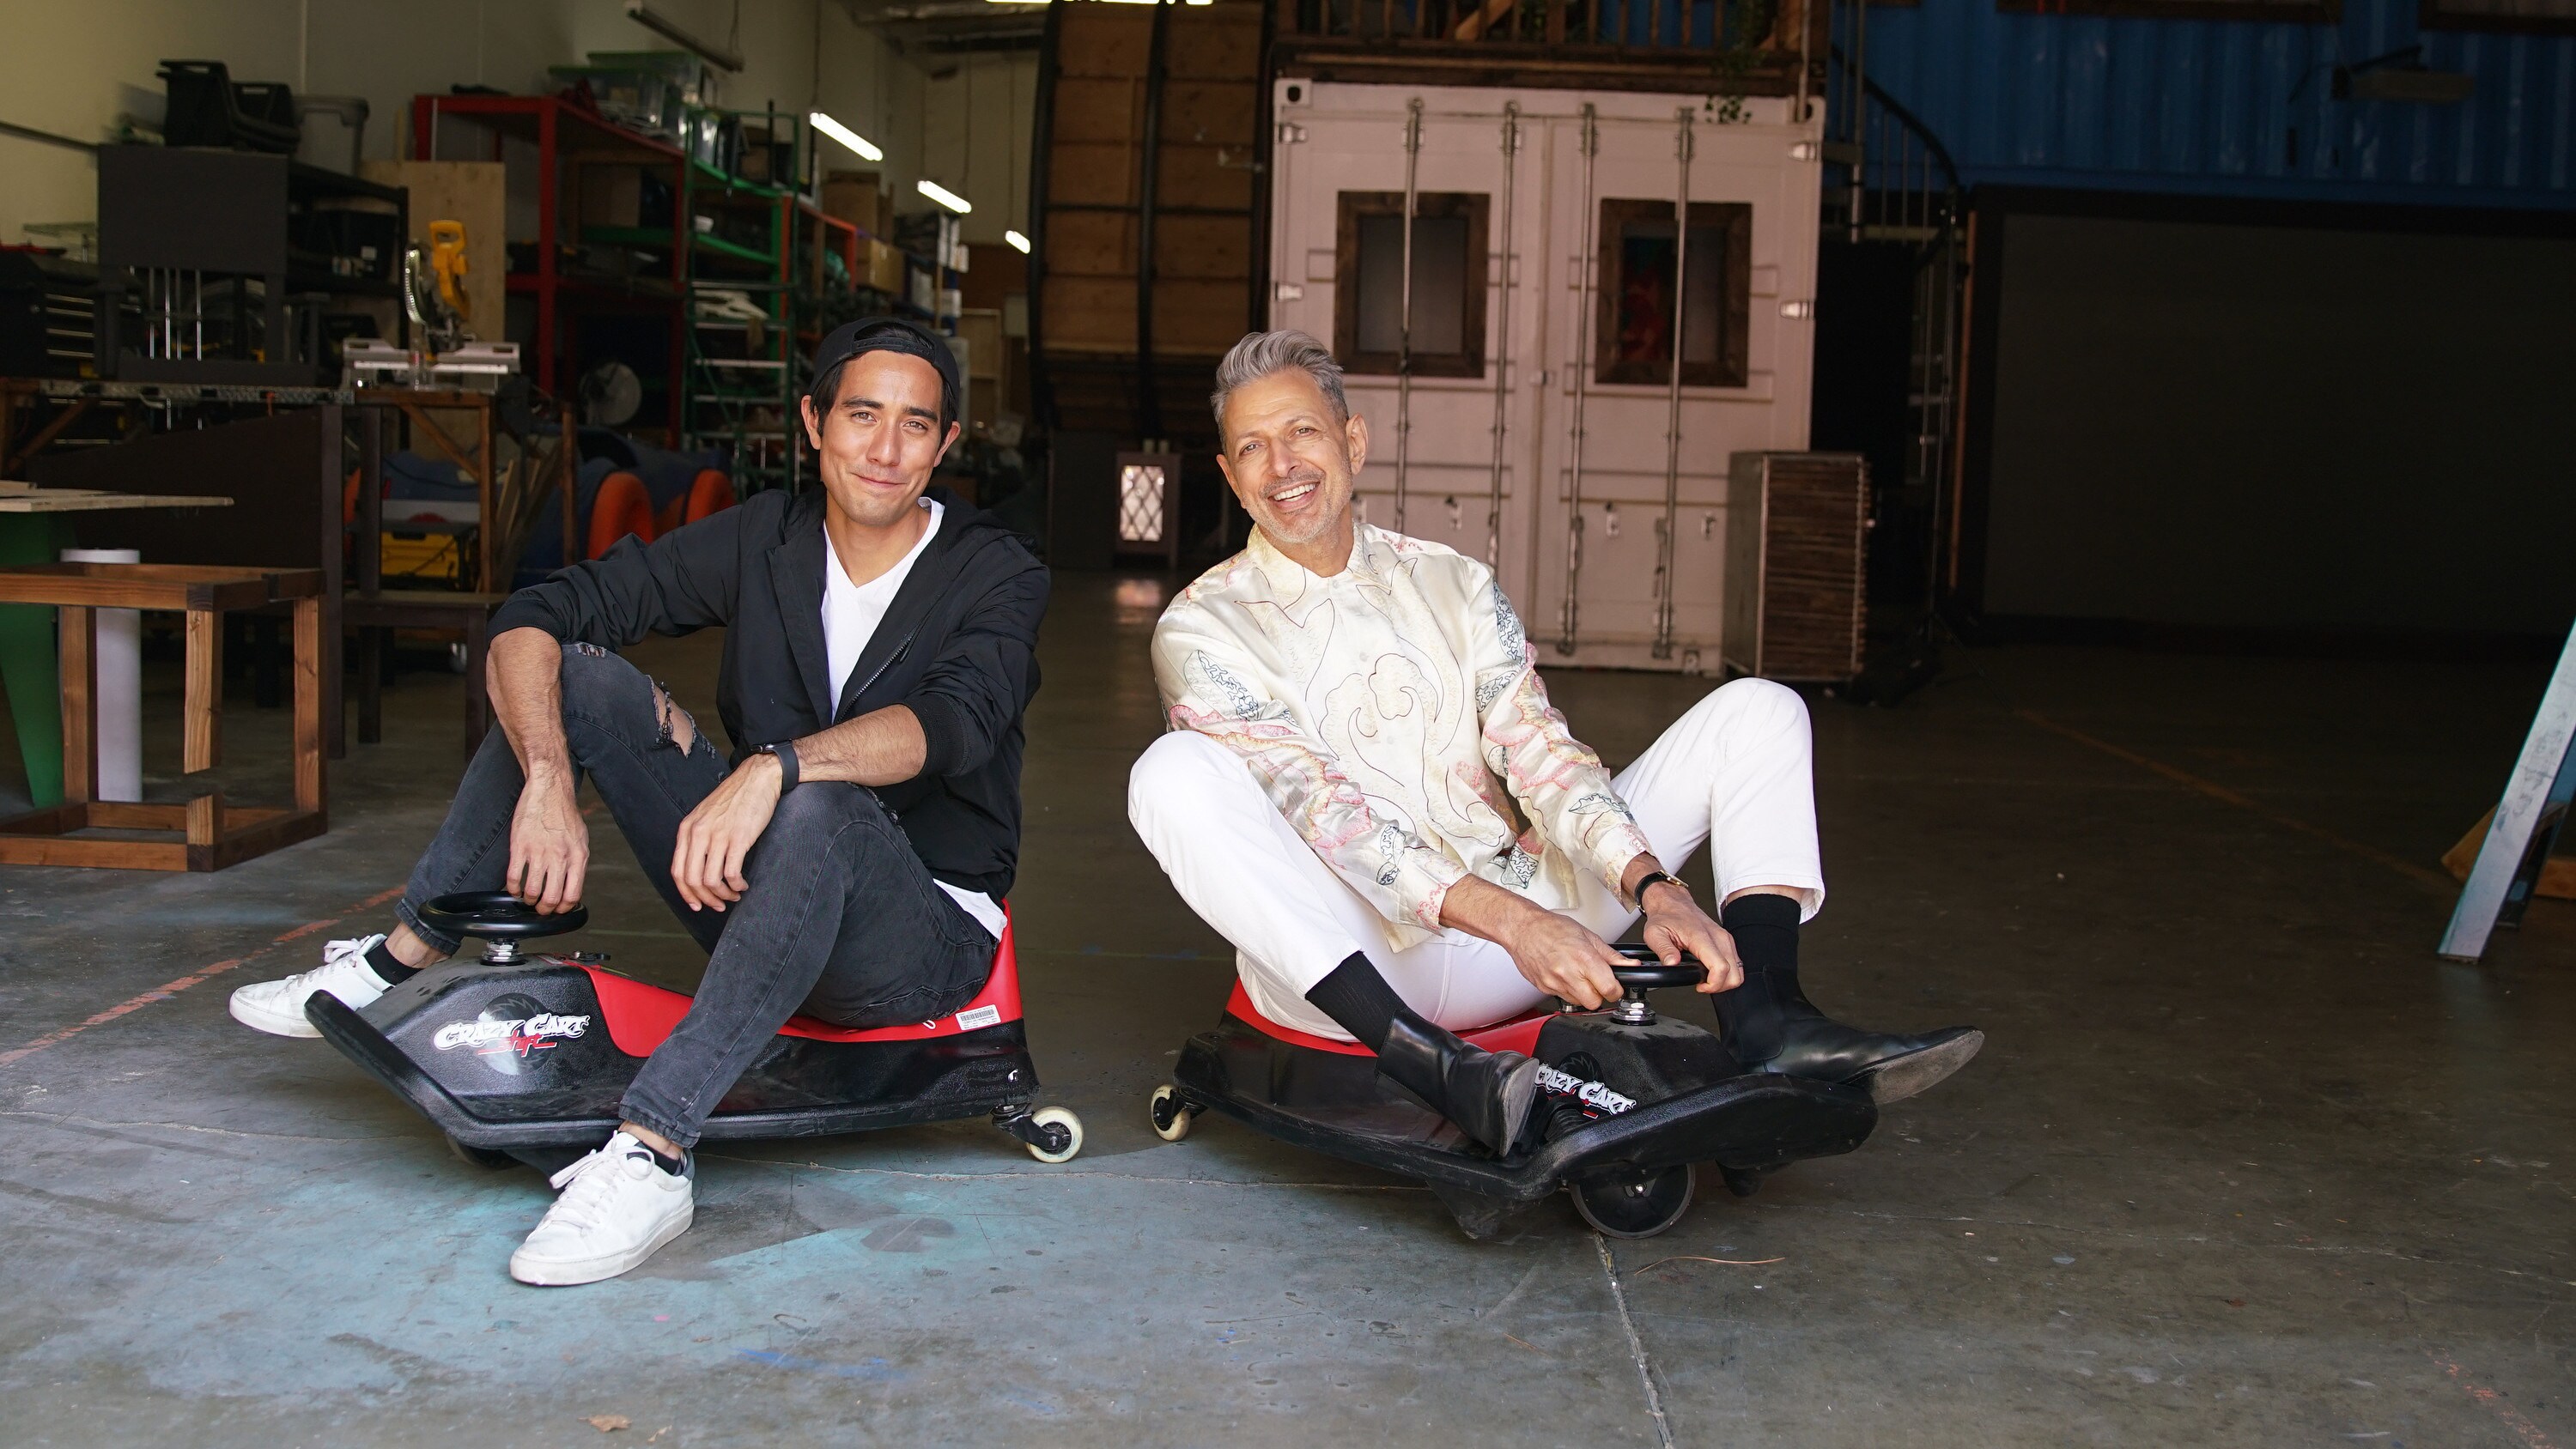 Los Angeles, CA - Jeff Goldblum (R) and Zach King on low dollies. (Credit: National Geographic)